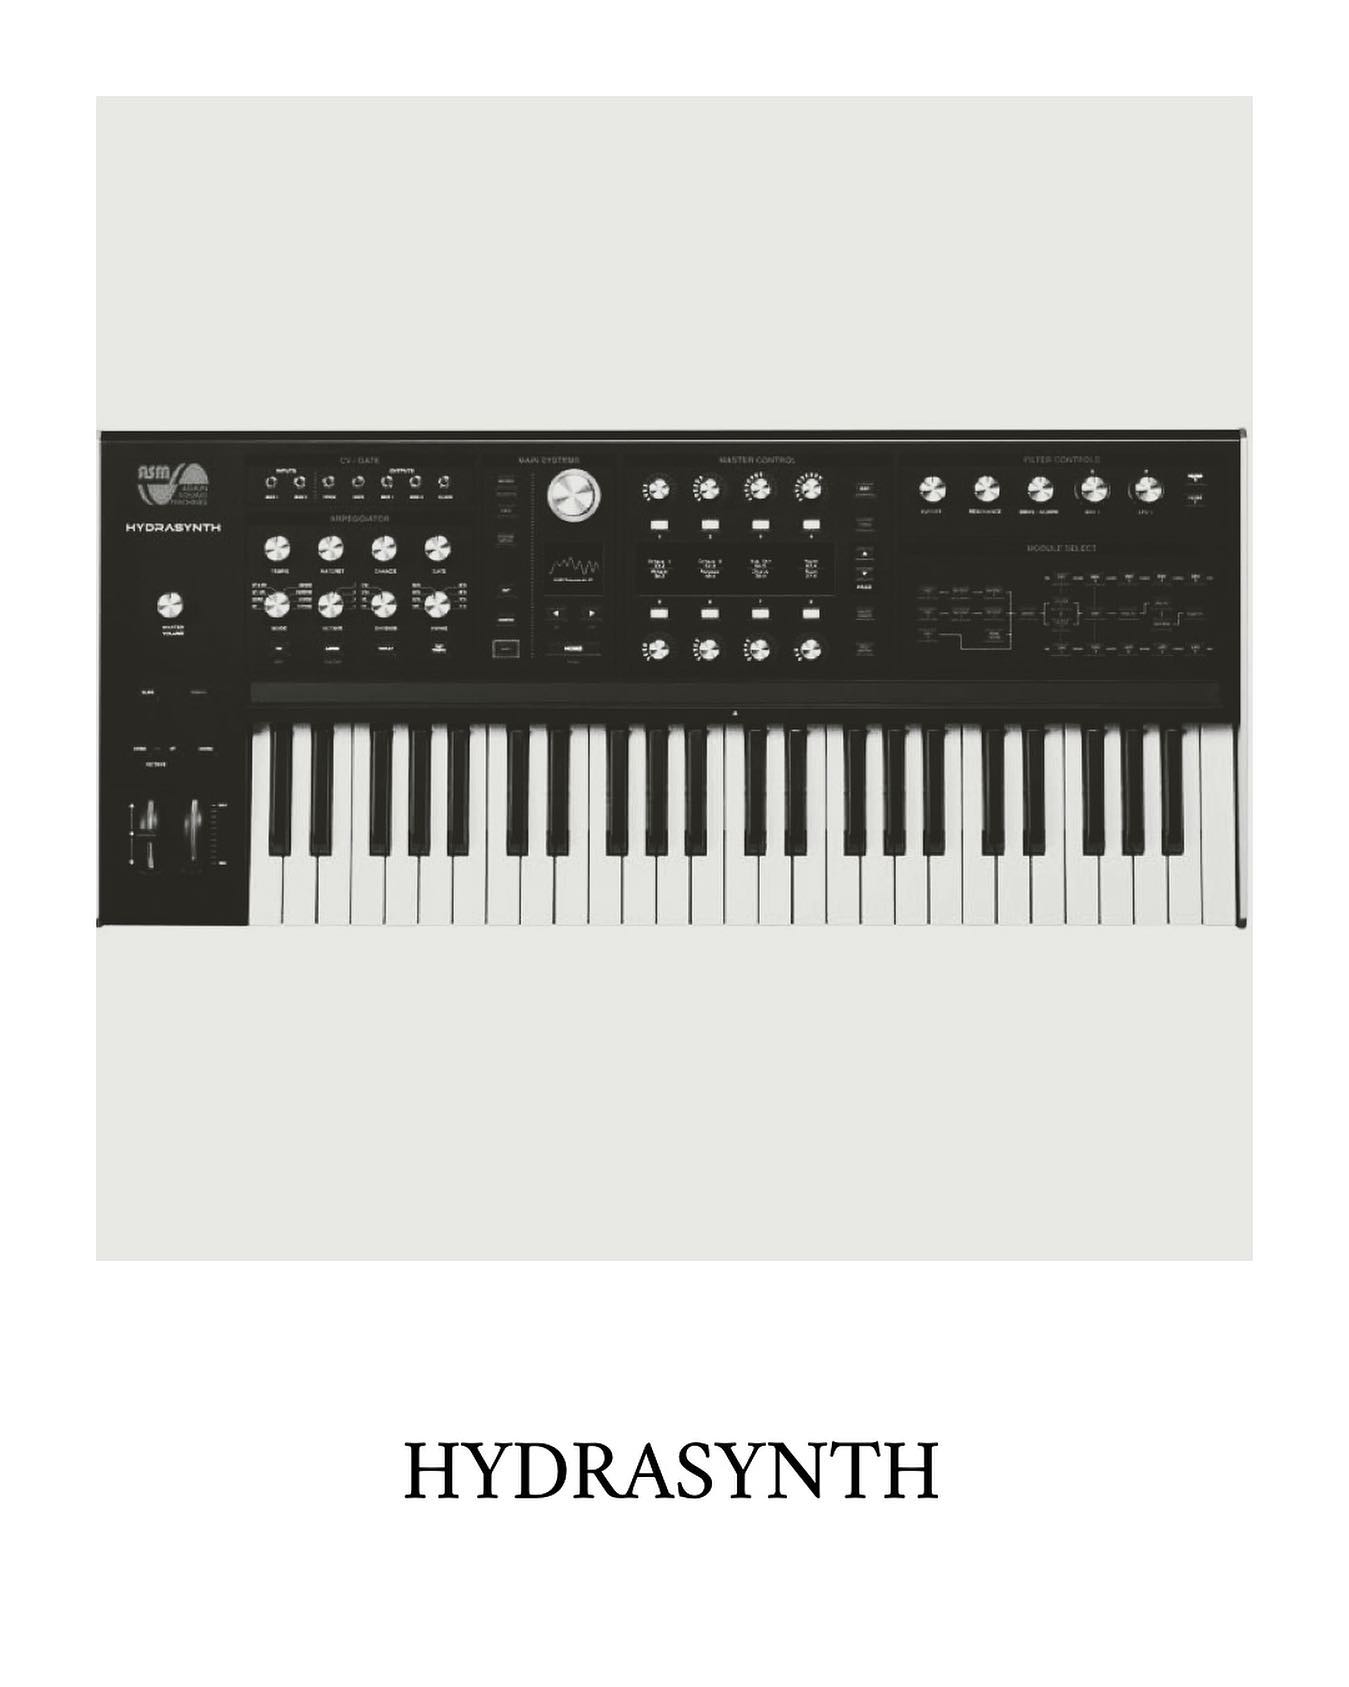 Playing this synth feels so expressive and musical. Not just a reimagination of the ‘Vangelis keyboard’, the infamous Yamaha CS-80, but an instrument with a lot of character and a ‘personality’ of its own…

#hydrasynth #synth #analogsynthesizer #electronicmusic #musicproduction #composer #composerlife #studio #studiolife #music #mgamusiccompany #ambient #ambientmusic